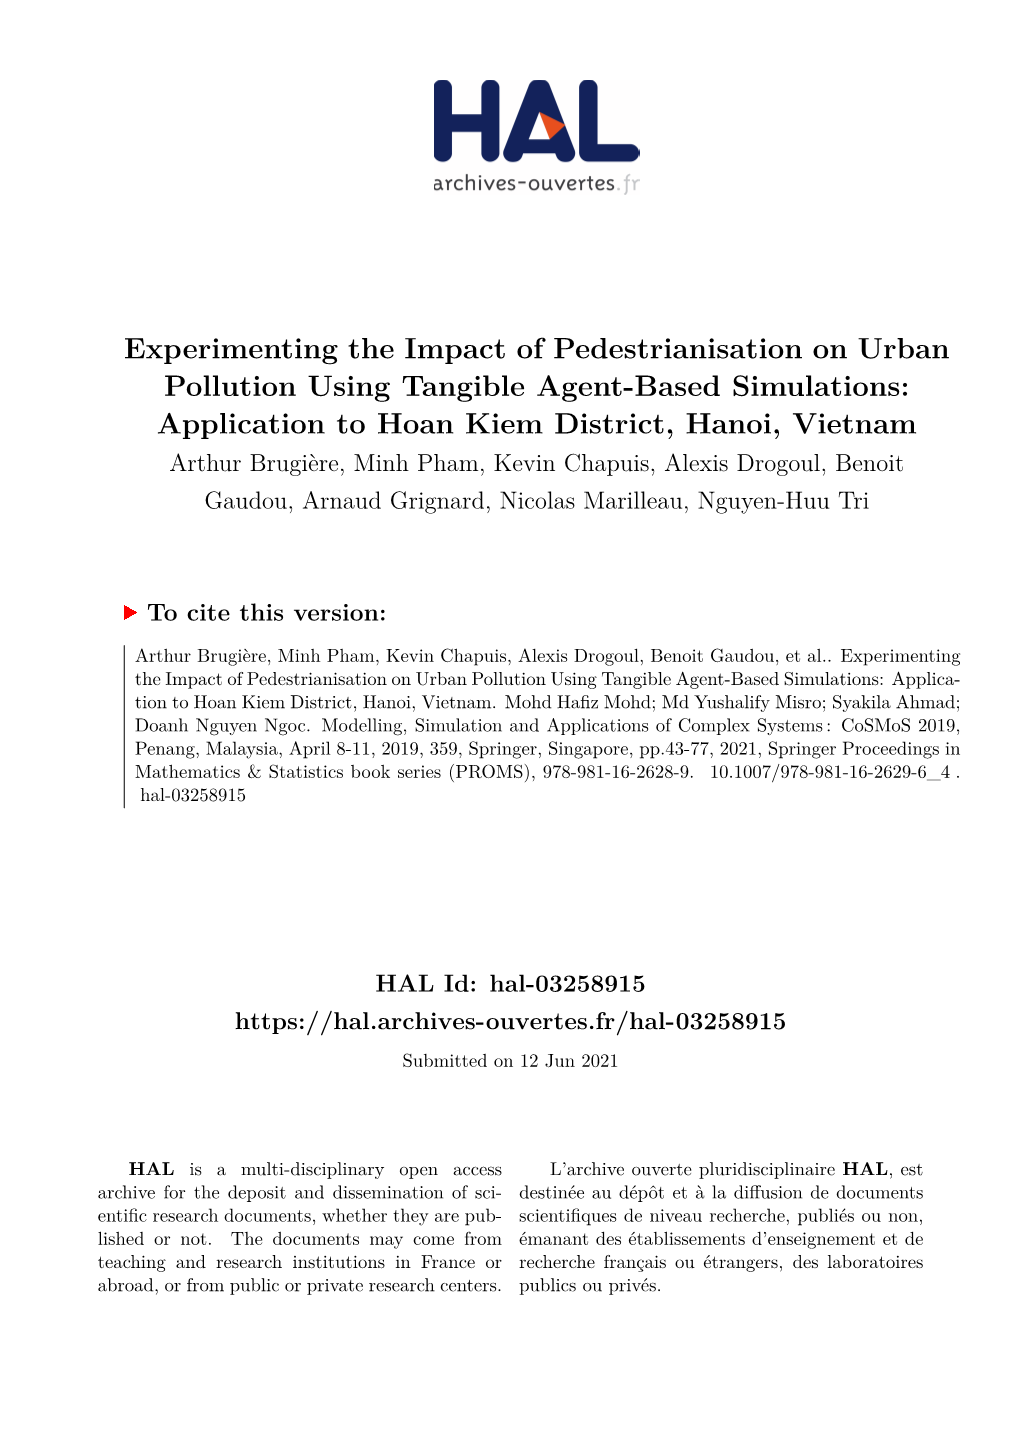 Experimenting the Impact of Pedestrianisation on Urban Pollution Using Tangible Agent-Based Simulations: Application to Hoan